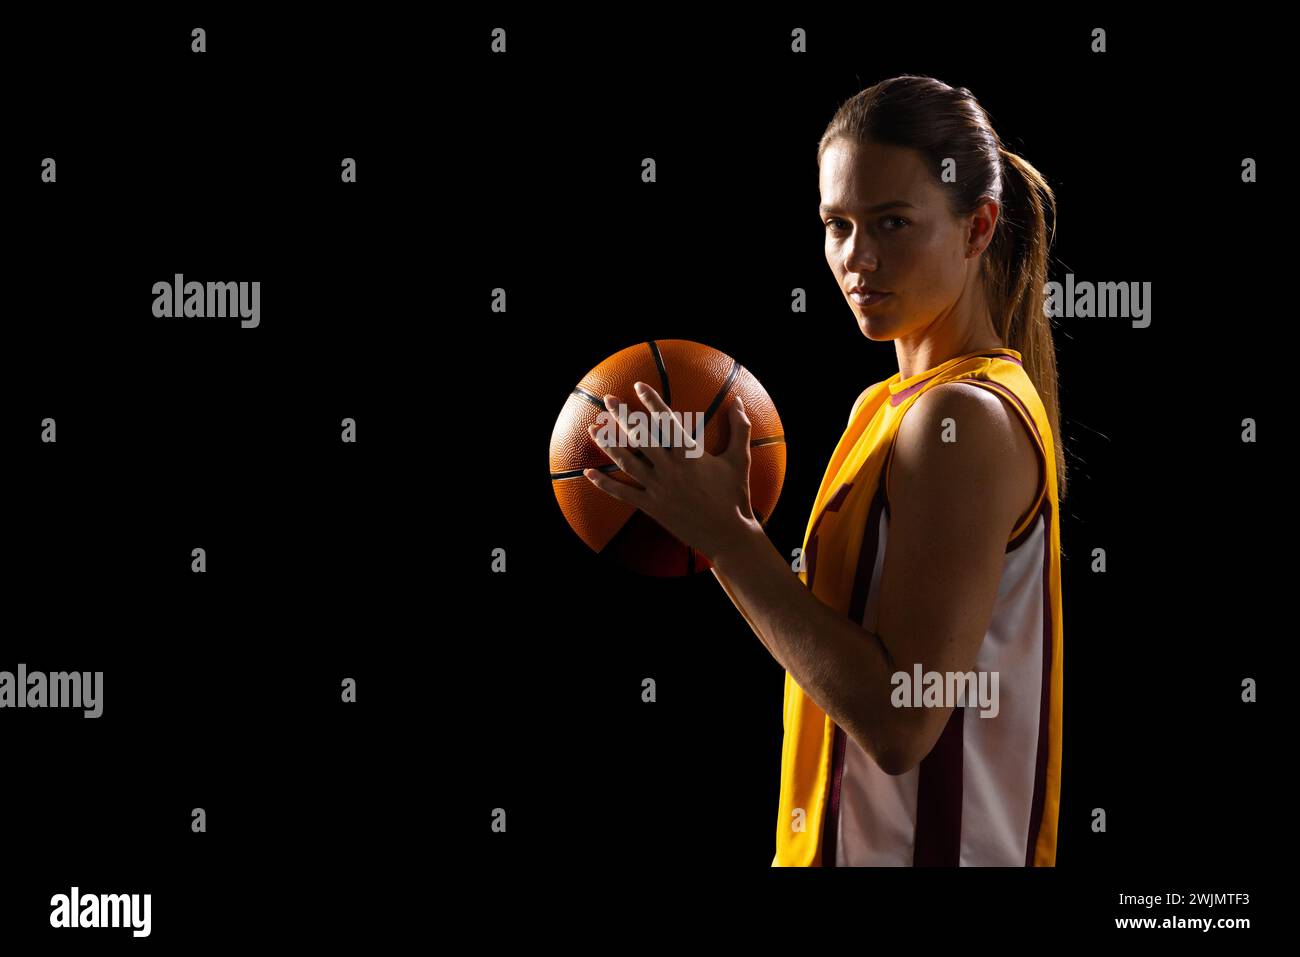 Focused female basketball player shines in a dark setting, exuding confidence. Stock Photo